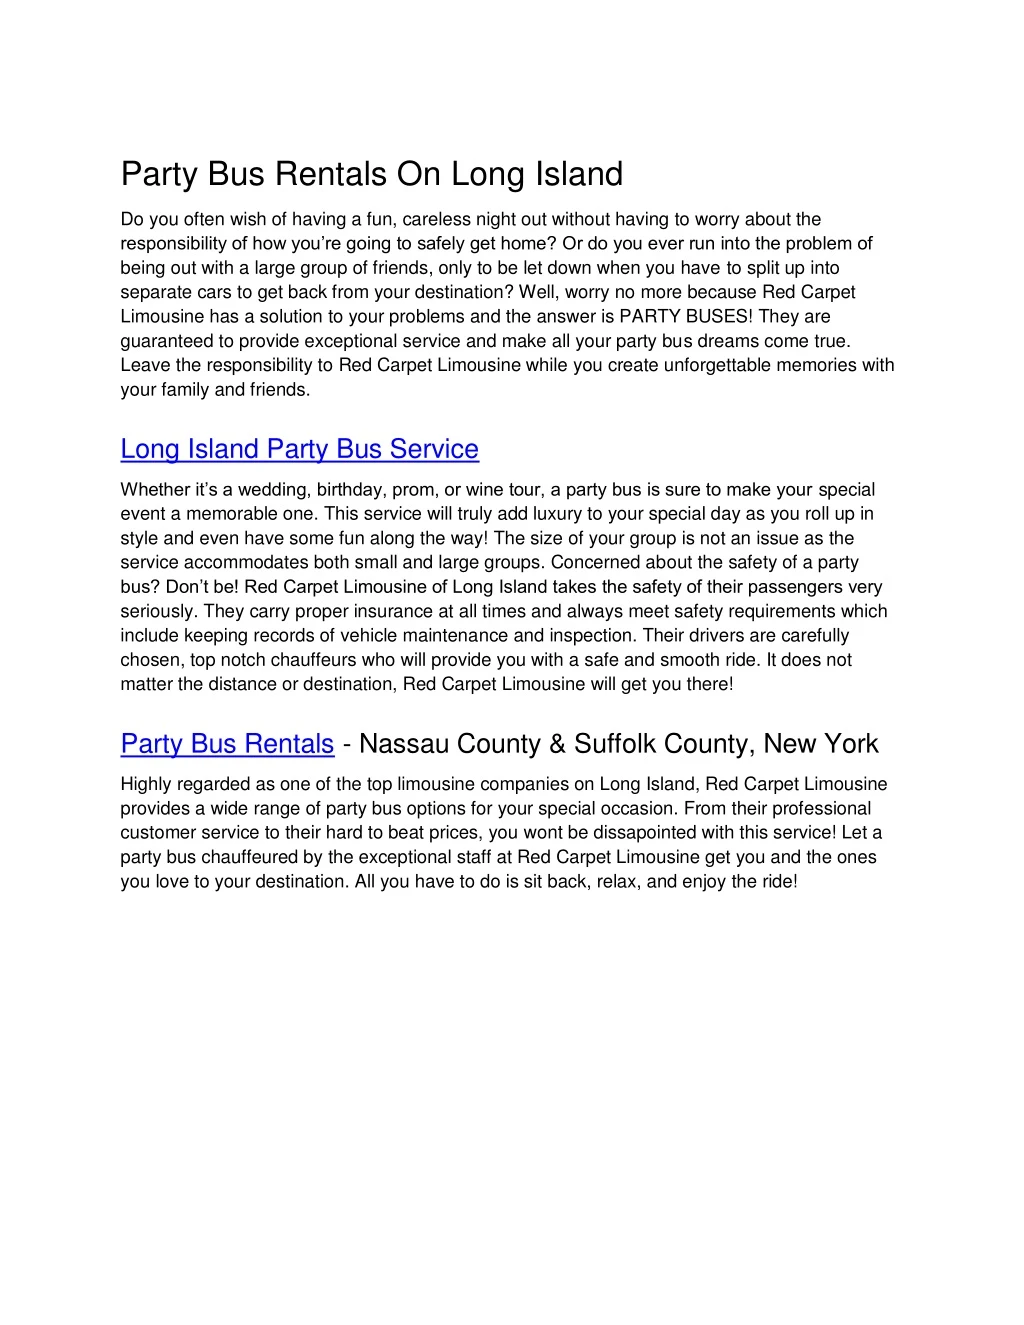 party bus rentals on long island